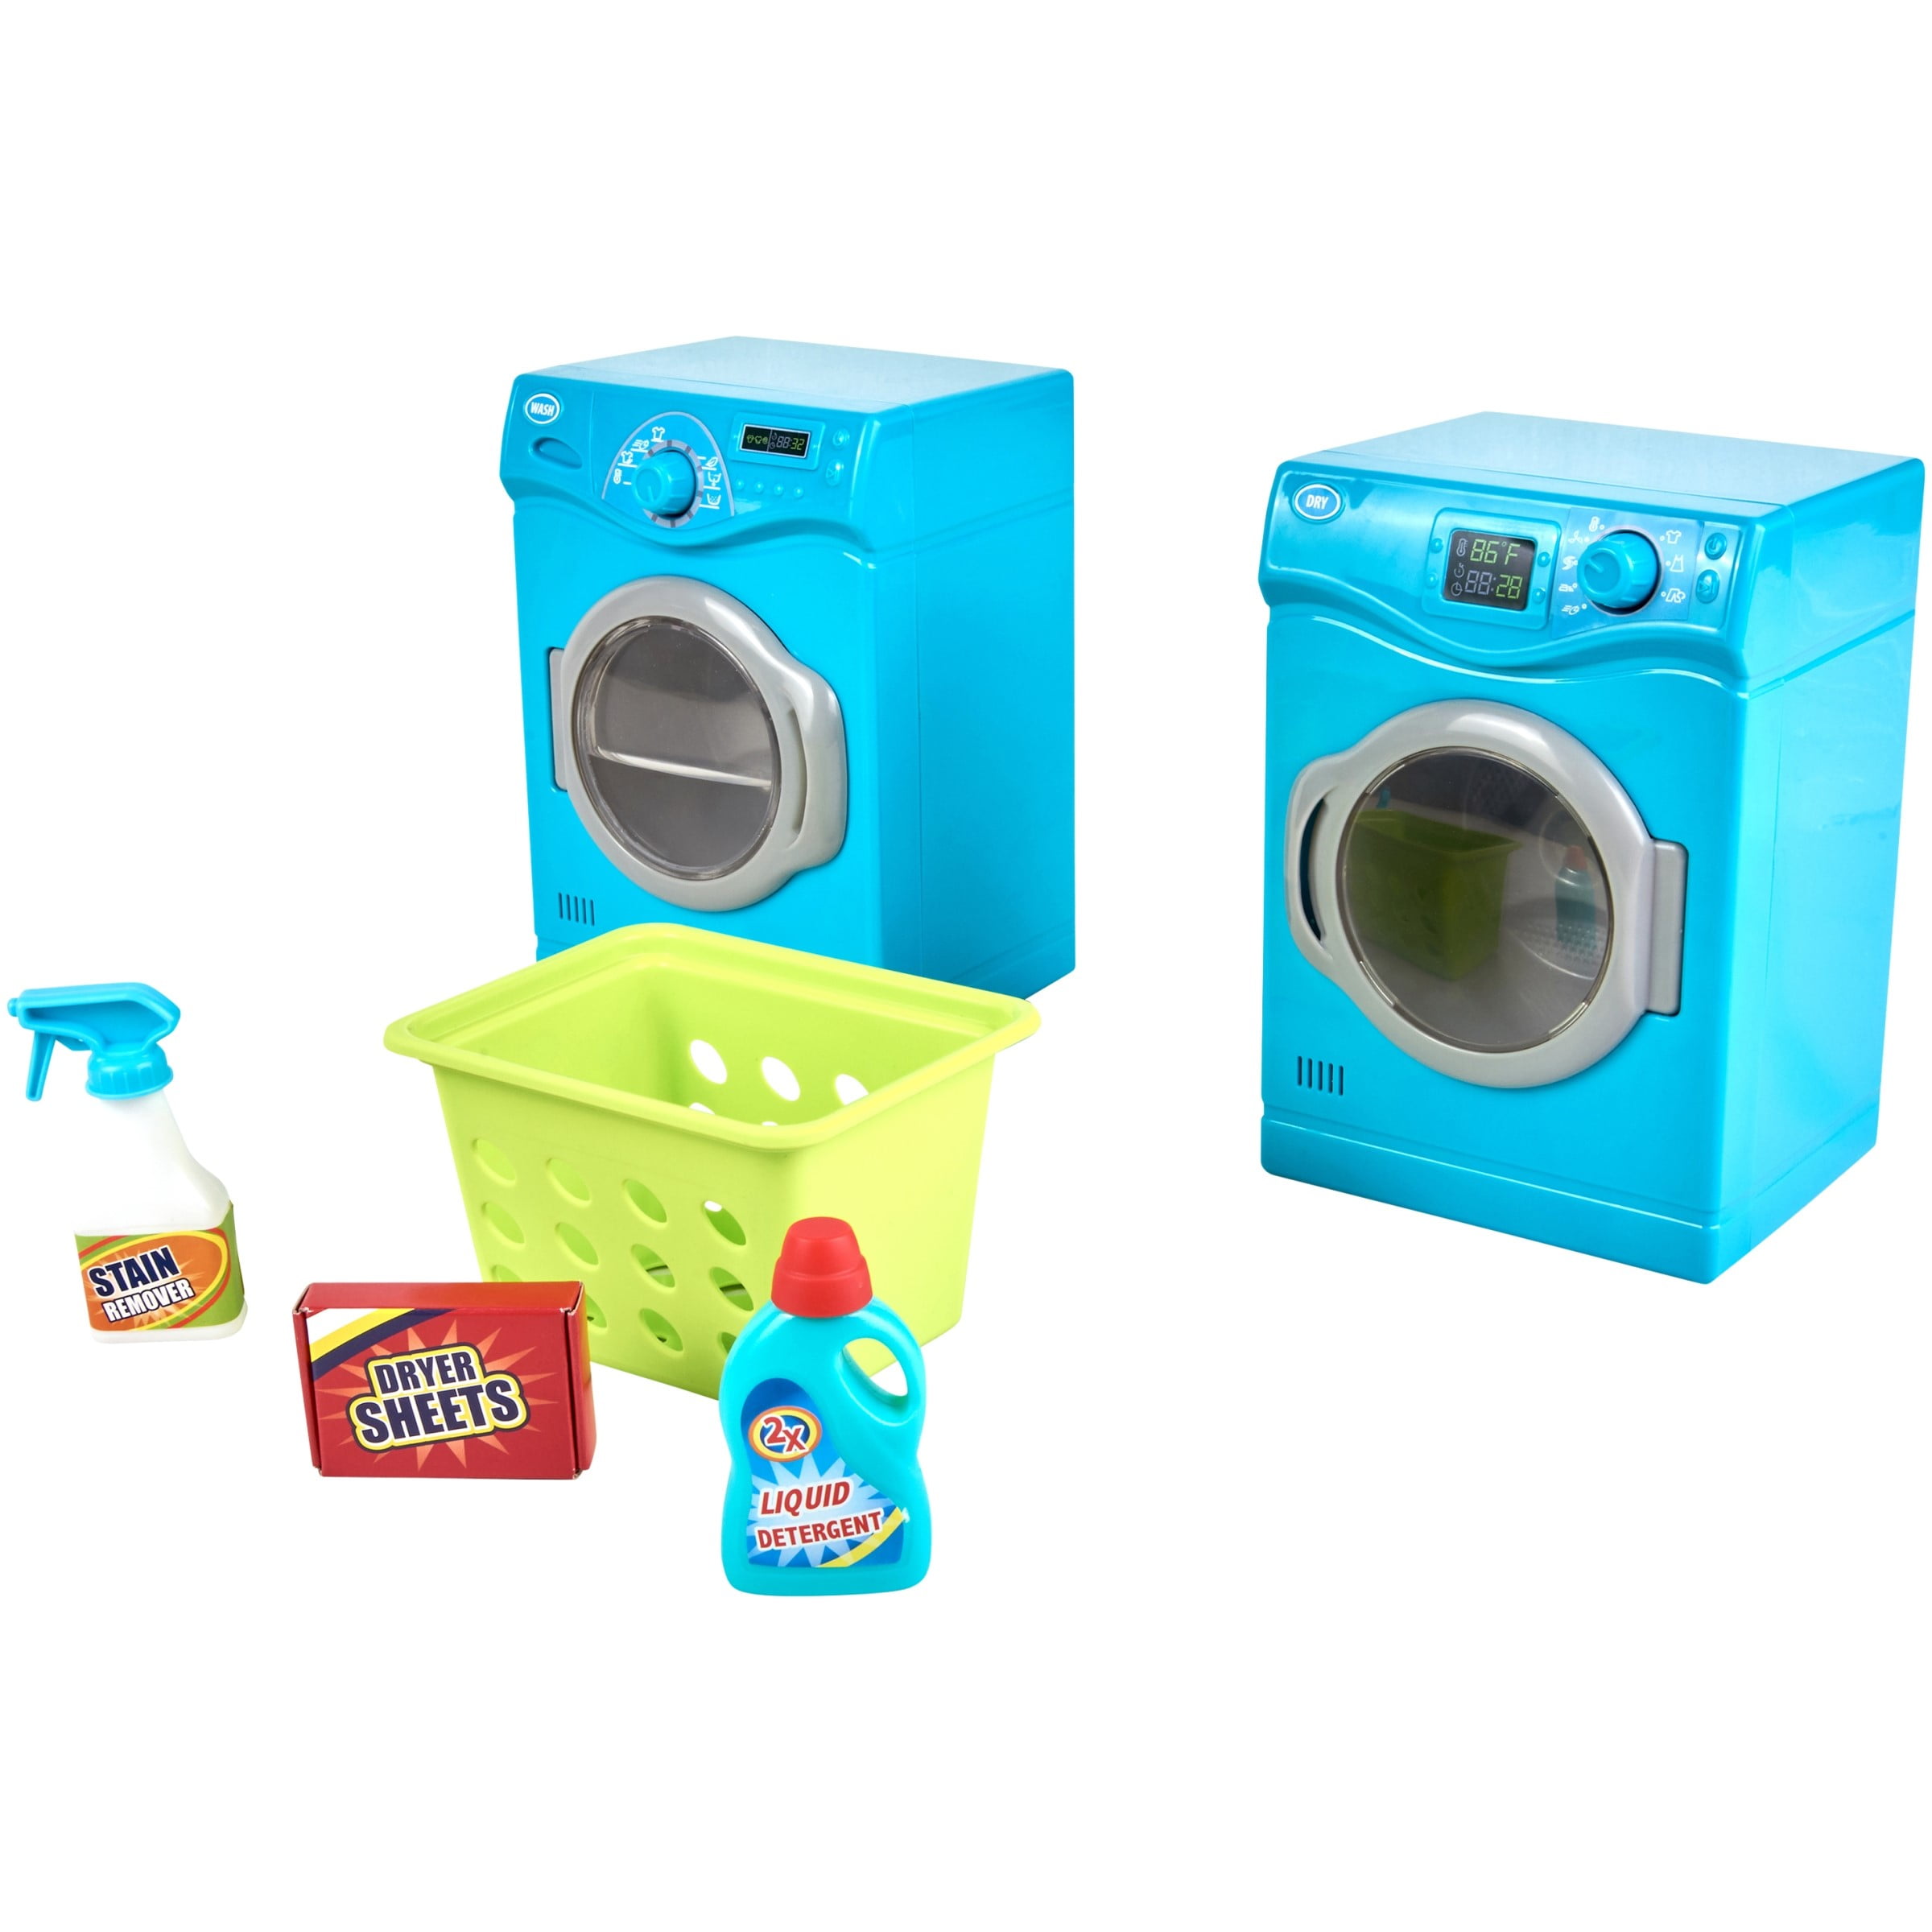 WalMart SG_B074W2F2FP_US Colors May Vary My Life As Laundry Room Playset